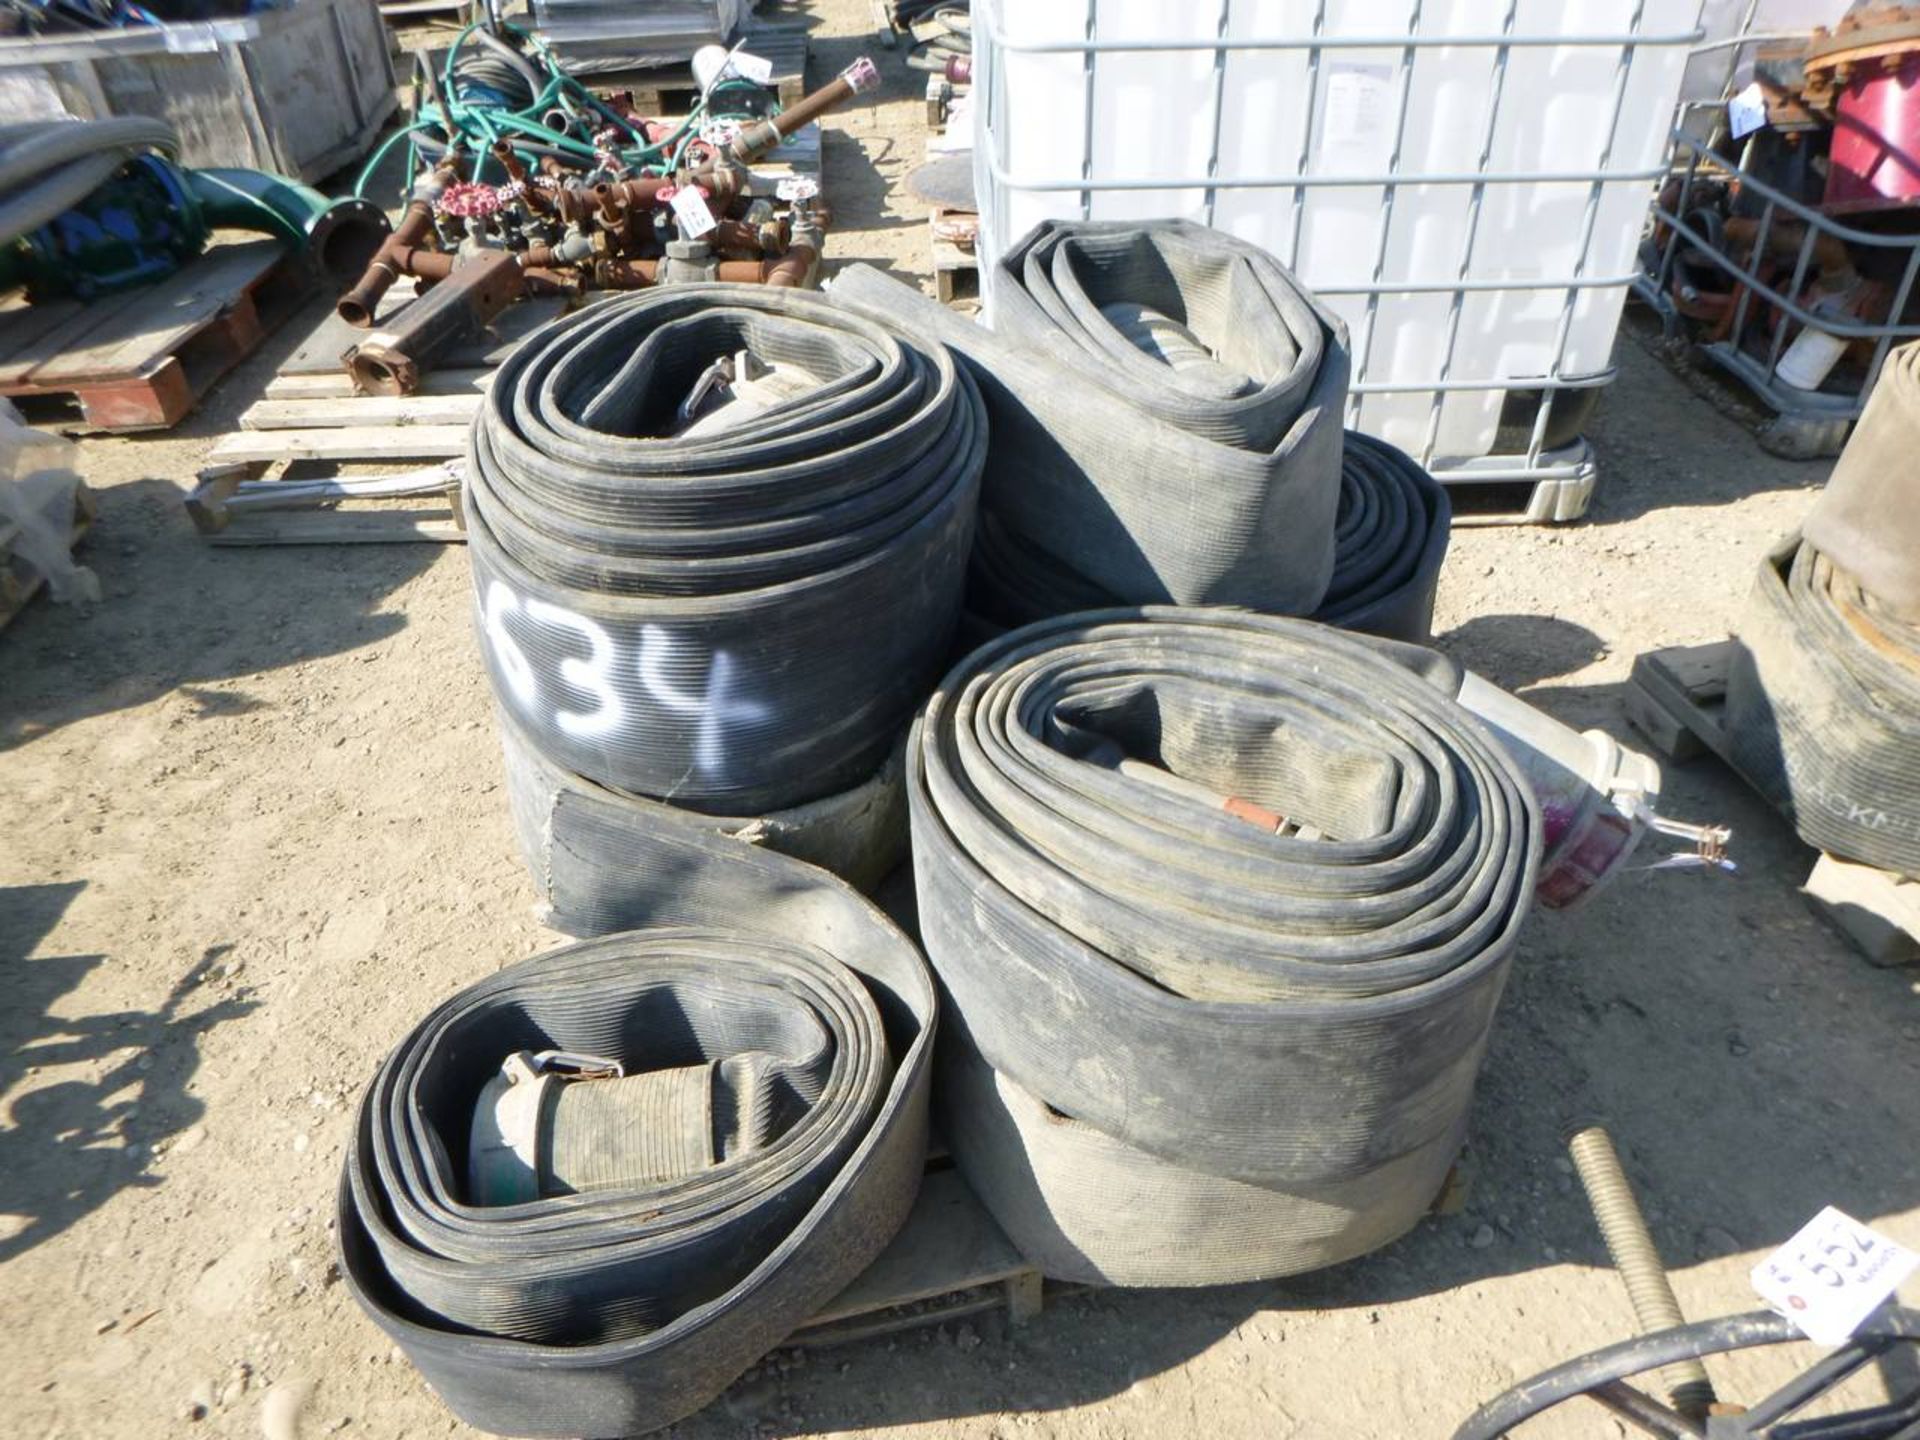 Lot of 6" lay flat hose with fittings